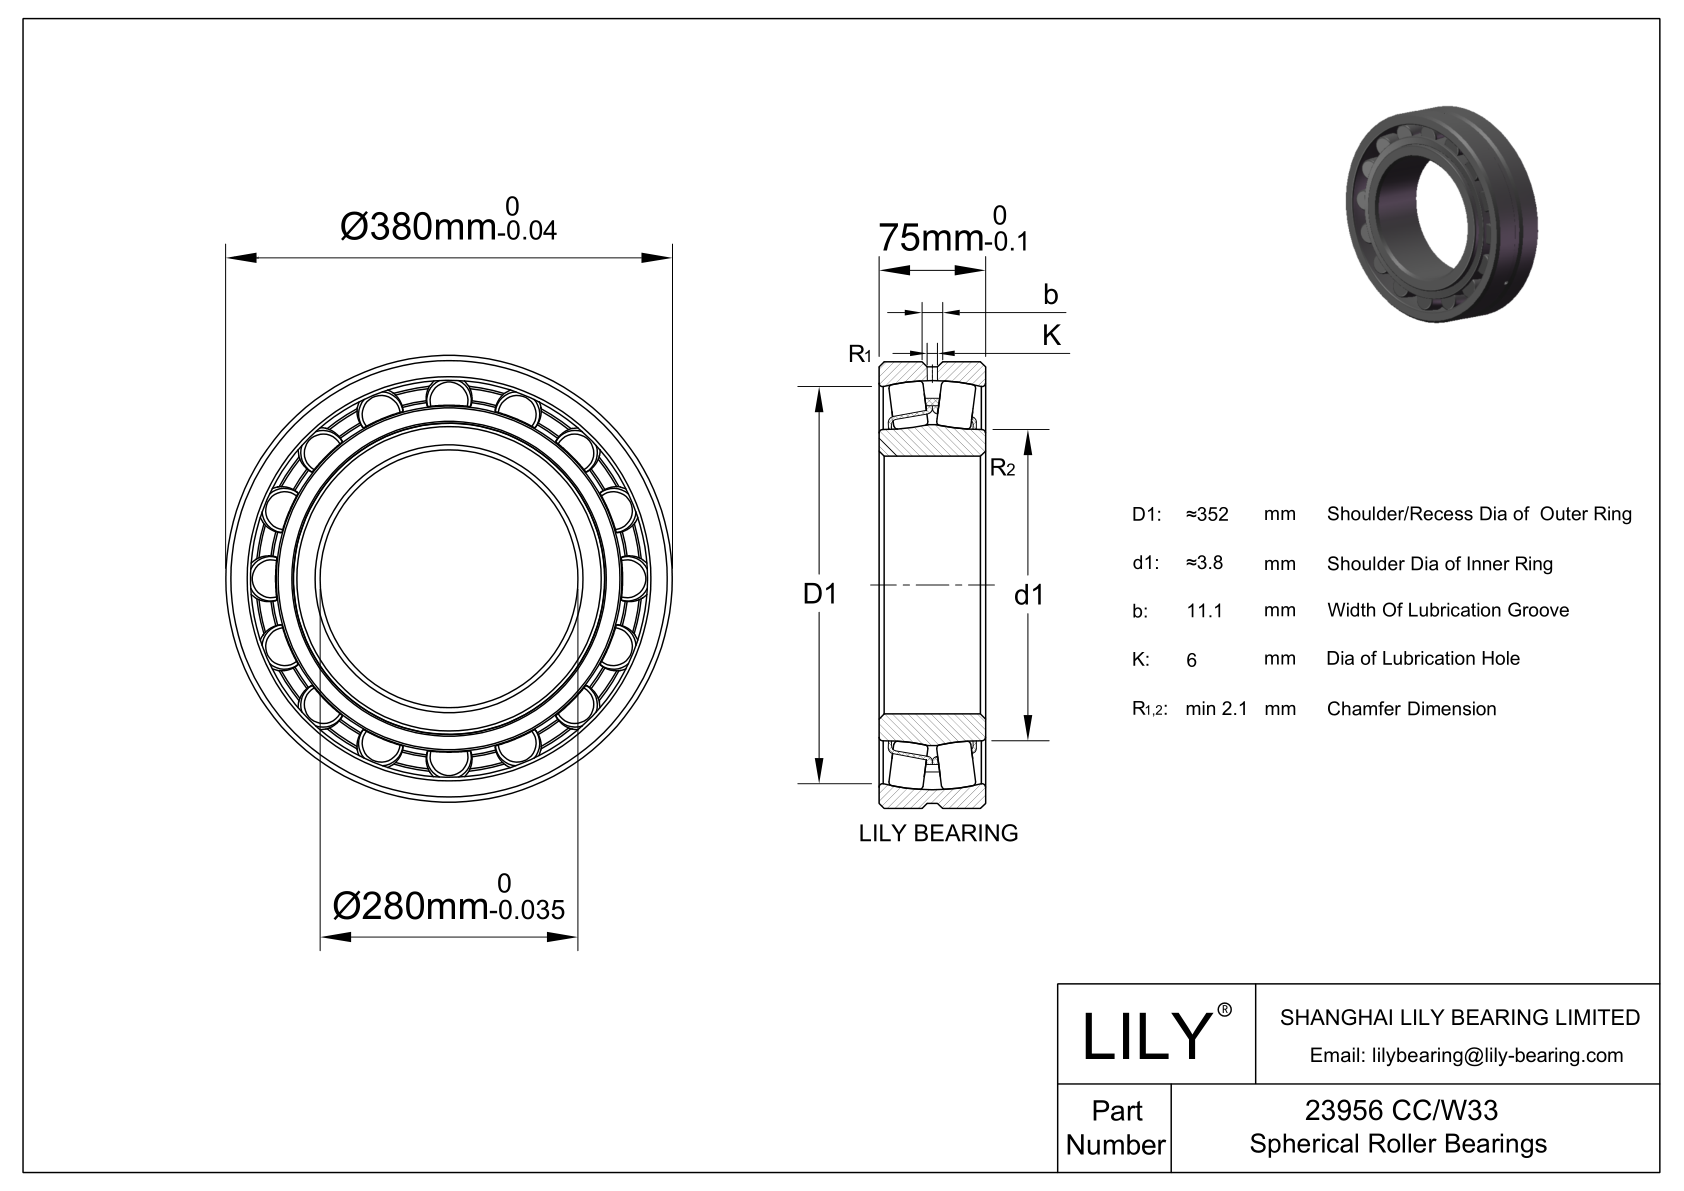 23956 CC/W33 Double Row Spherical Roller Bearing cad drawing